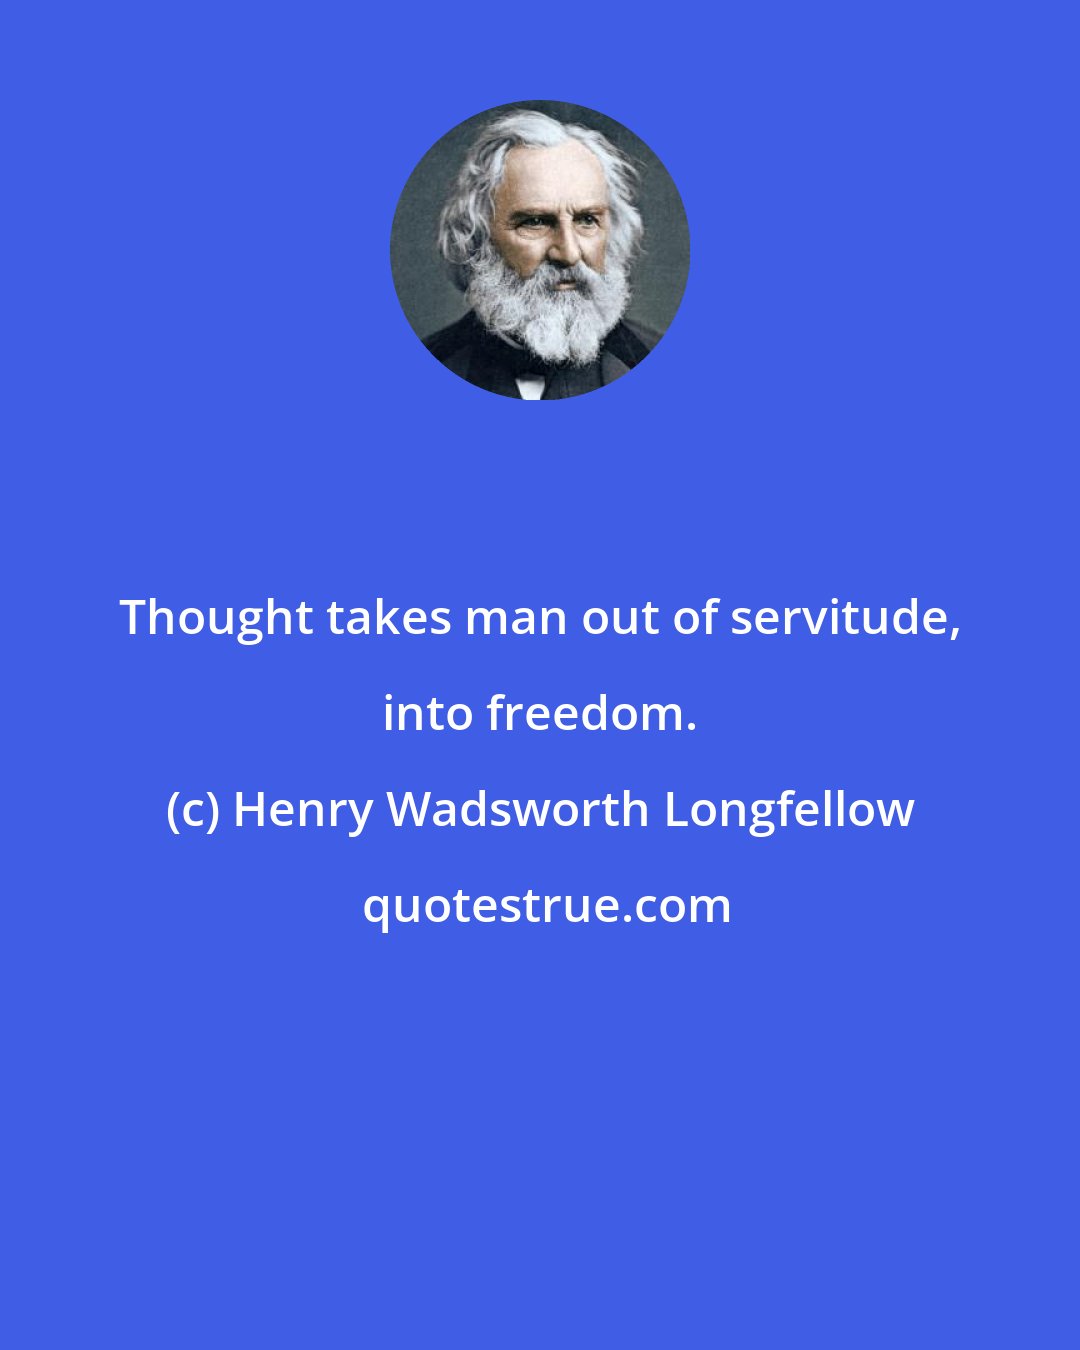 Henry Wadsworth Longfellow: Thought takes man out of servitude, into freedom.